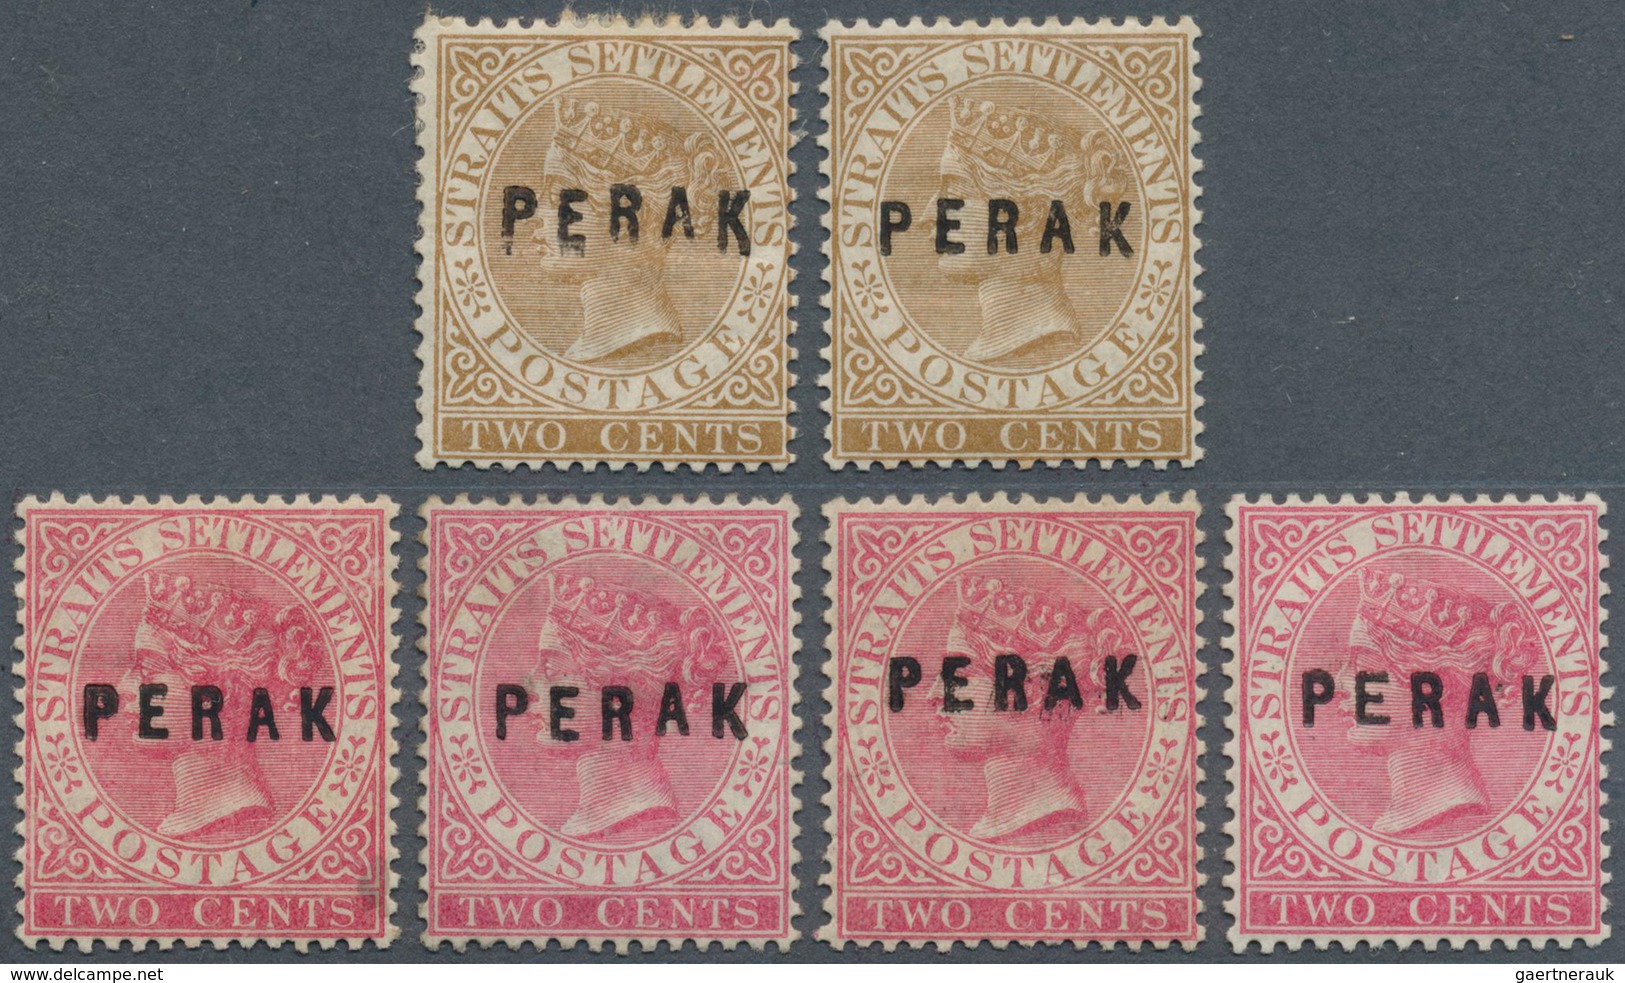 Malaiische Staaten - Perak: 1882-83 Six Stamps QV 2c., Wmk Crown CA, With The Four Different Types O - Perak